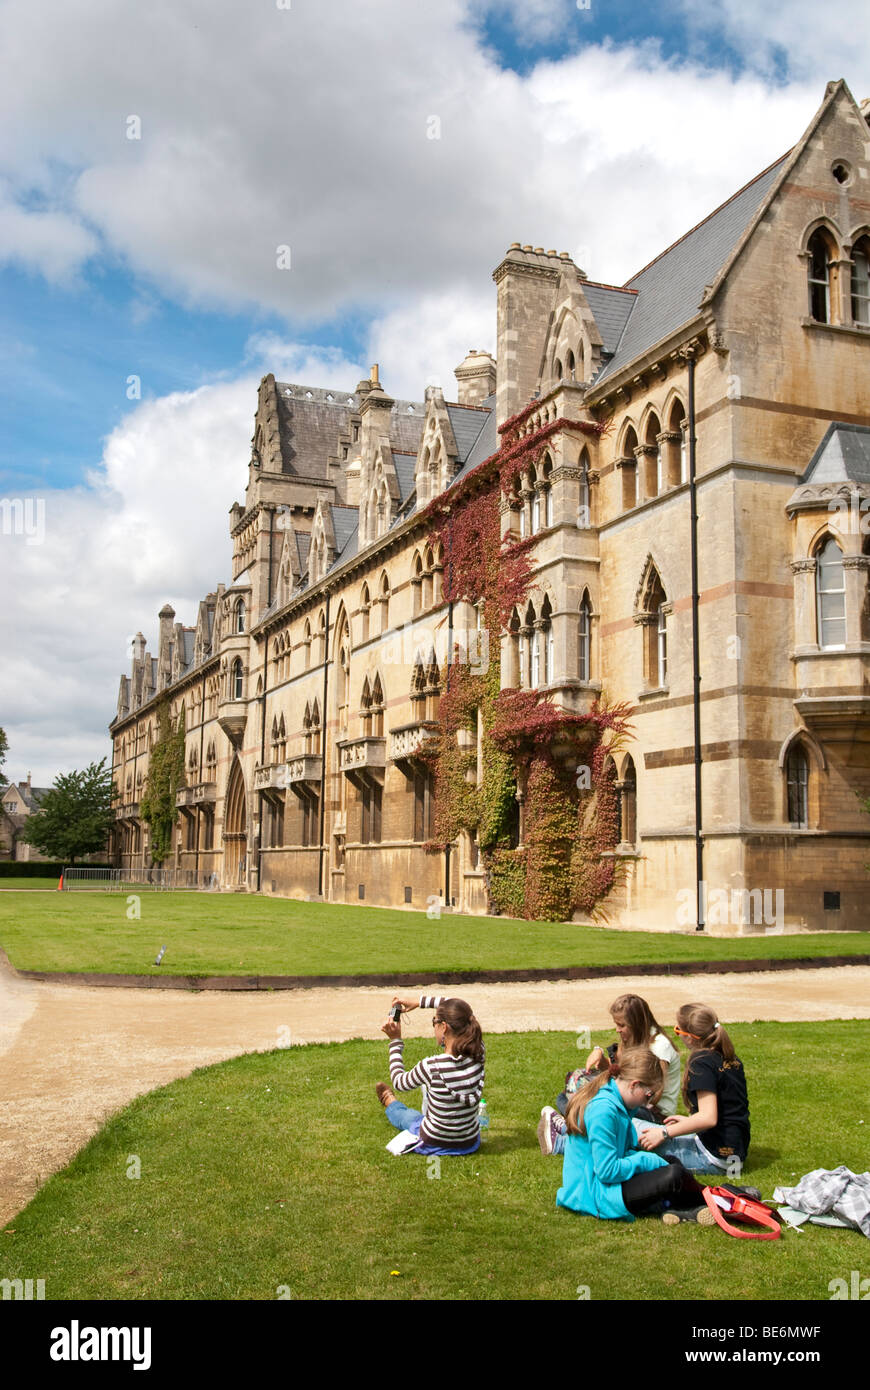 A group of young girls sitting on the lawn outside Christ College, St Aldate's on the Broadwalk Stock Photo